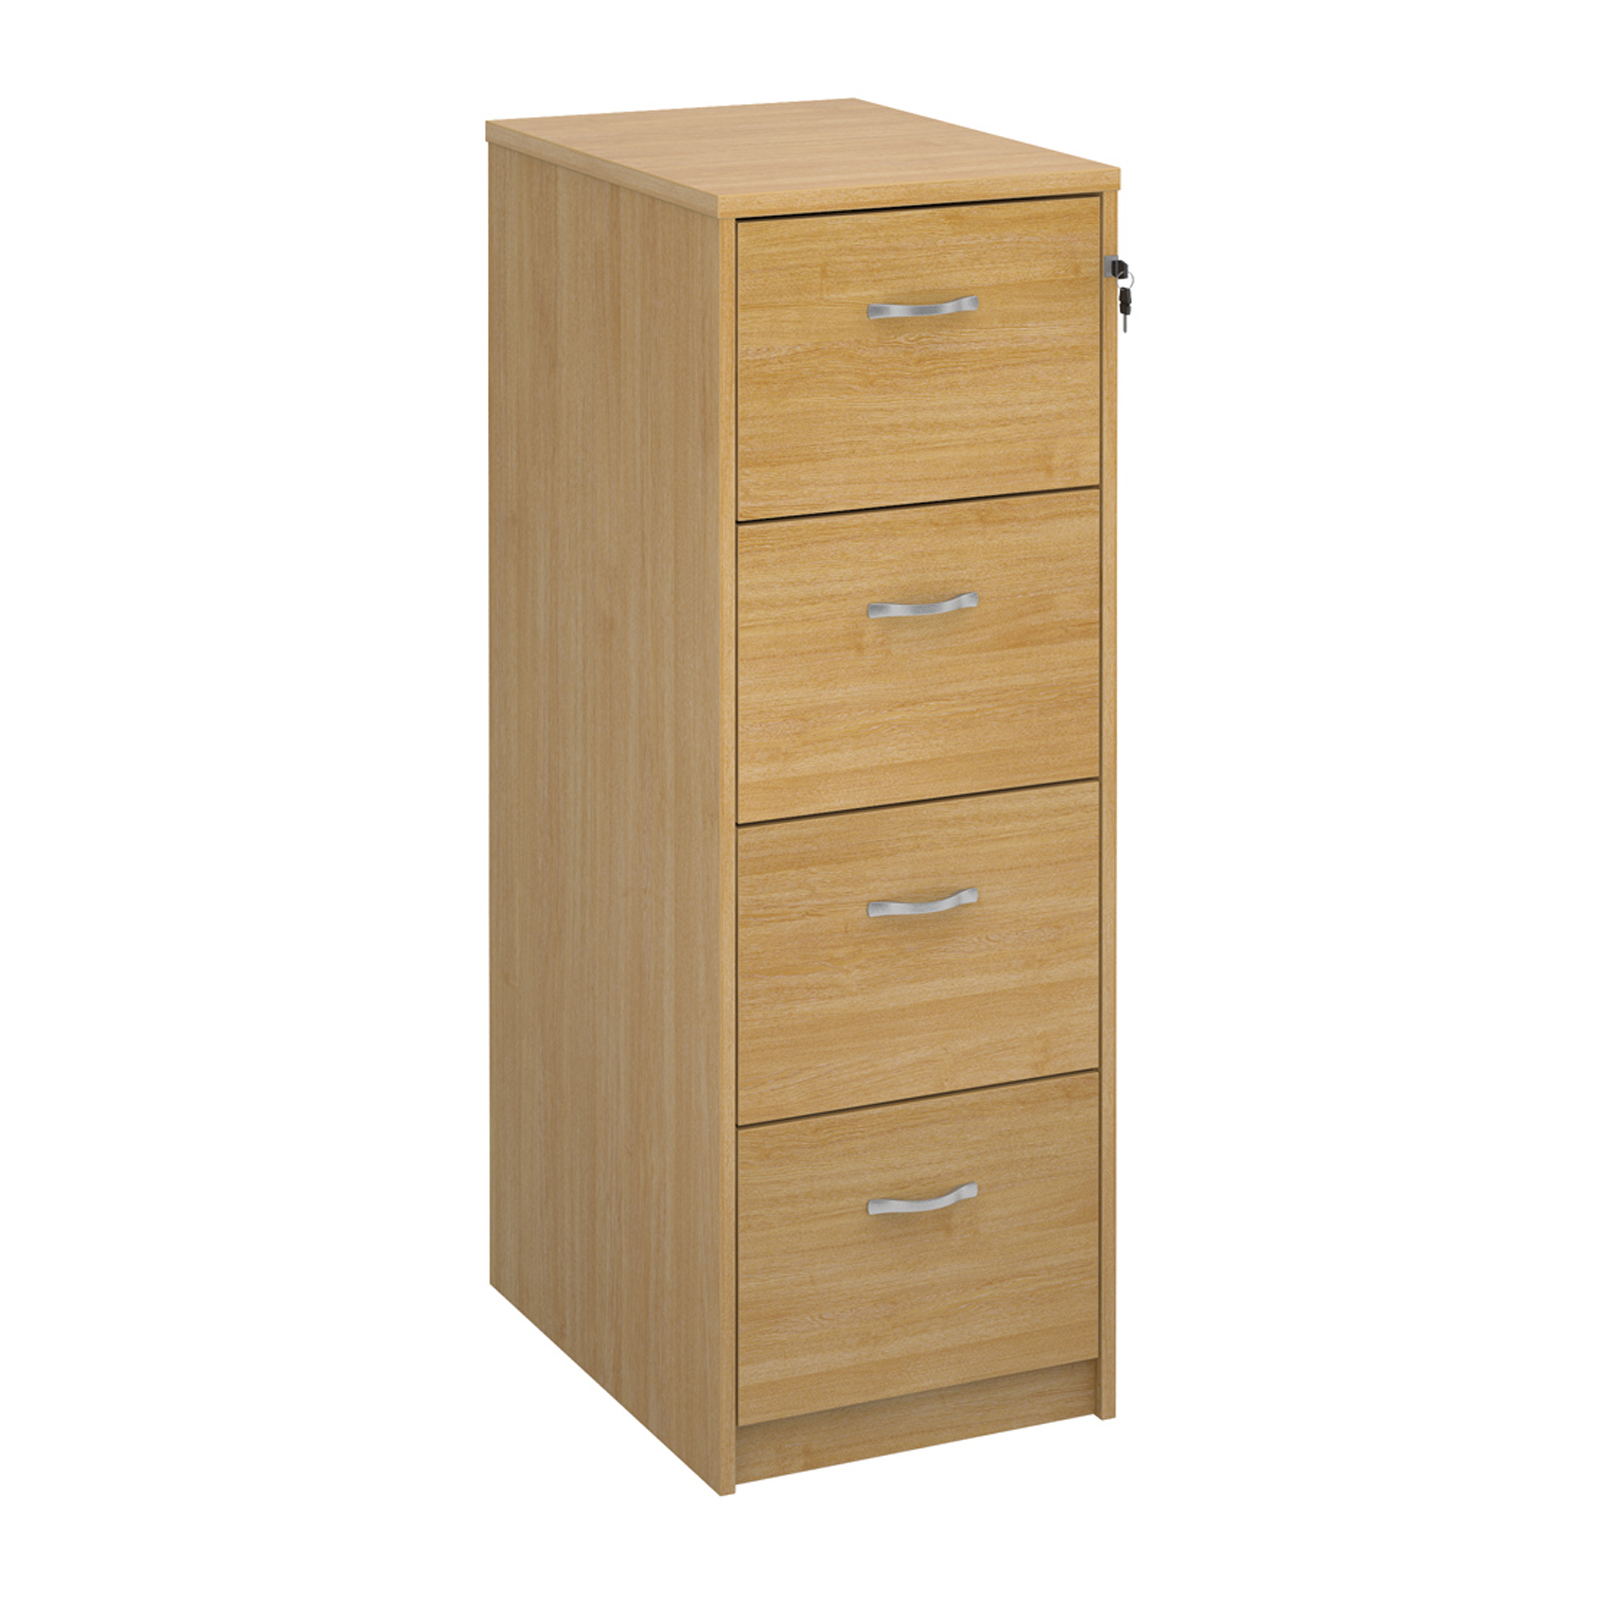 Wood Wooden 4 drawer filing cabinet with silver handles 1360mm high - oak